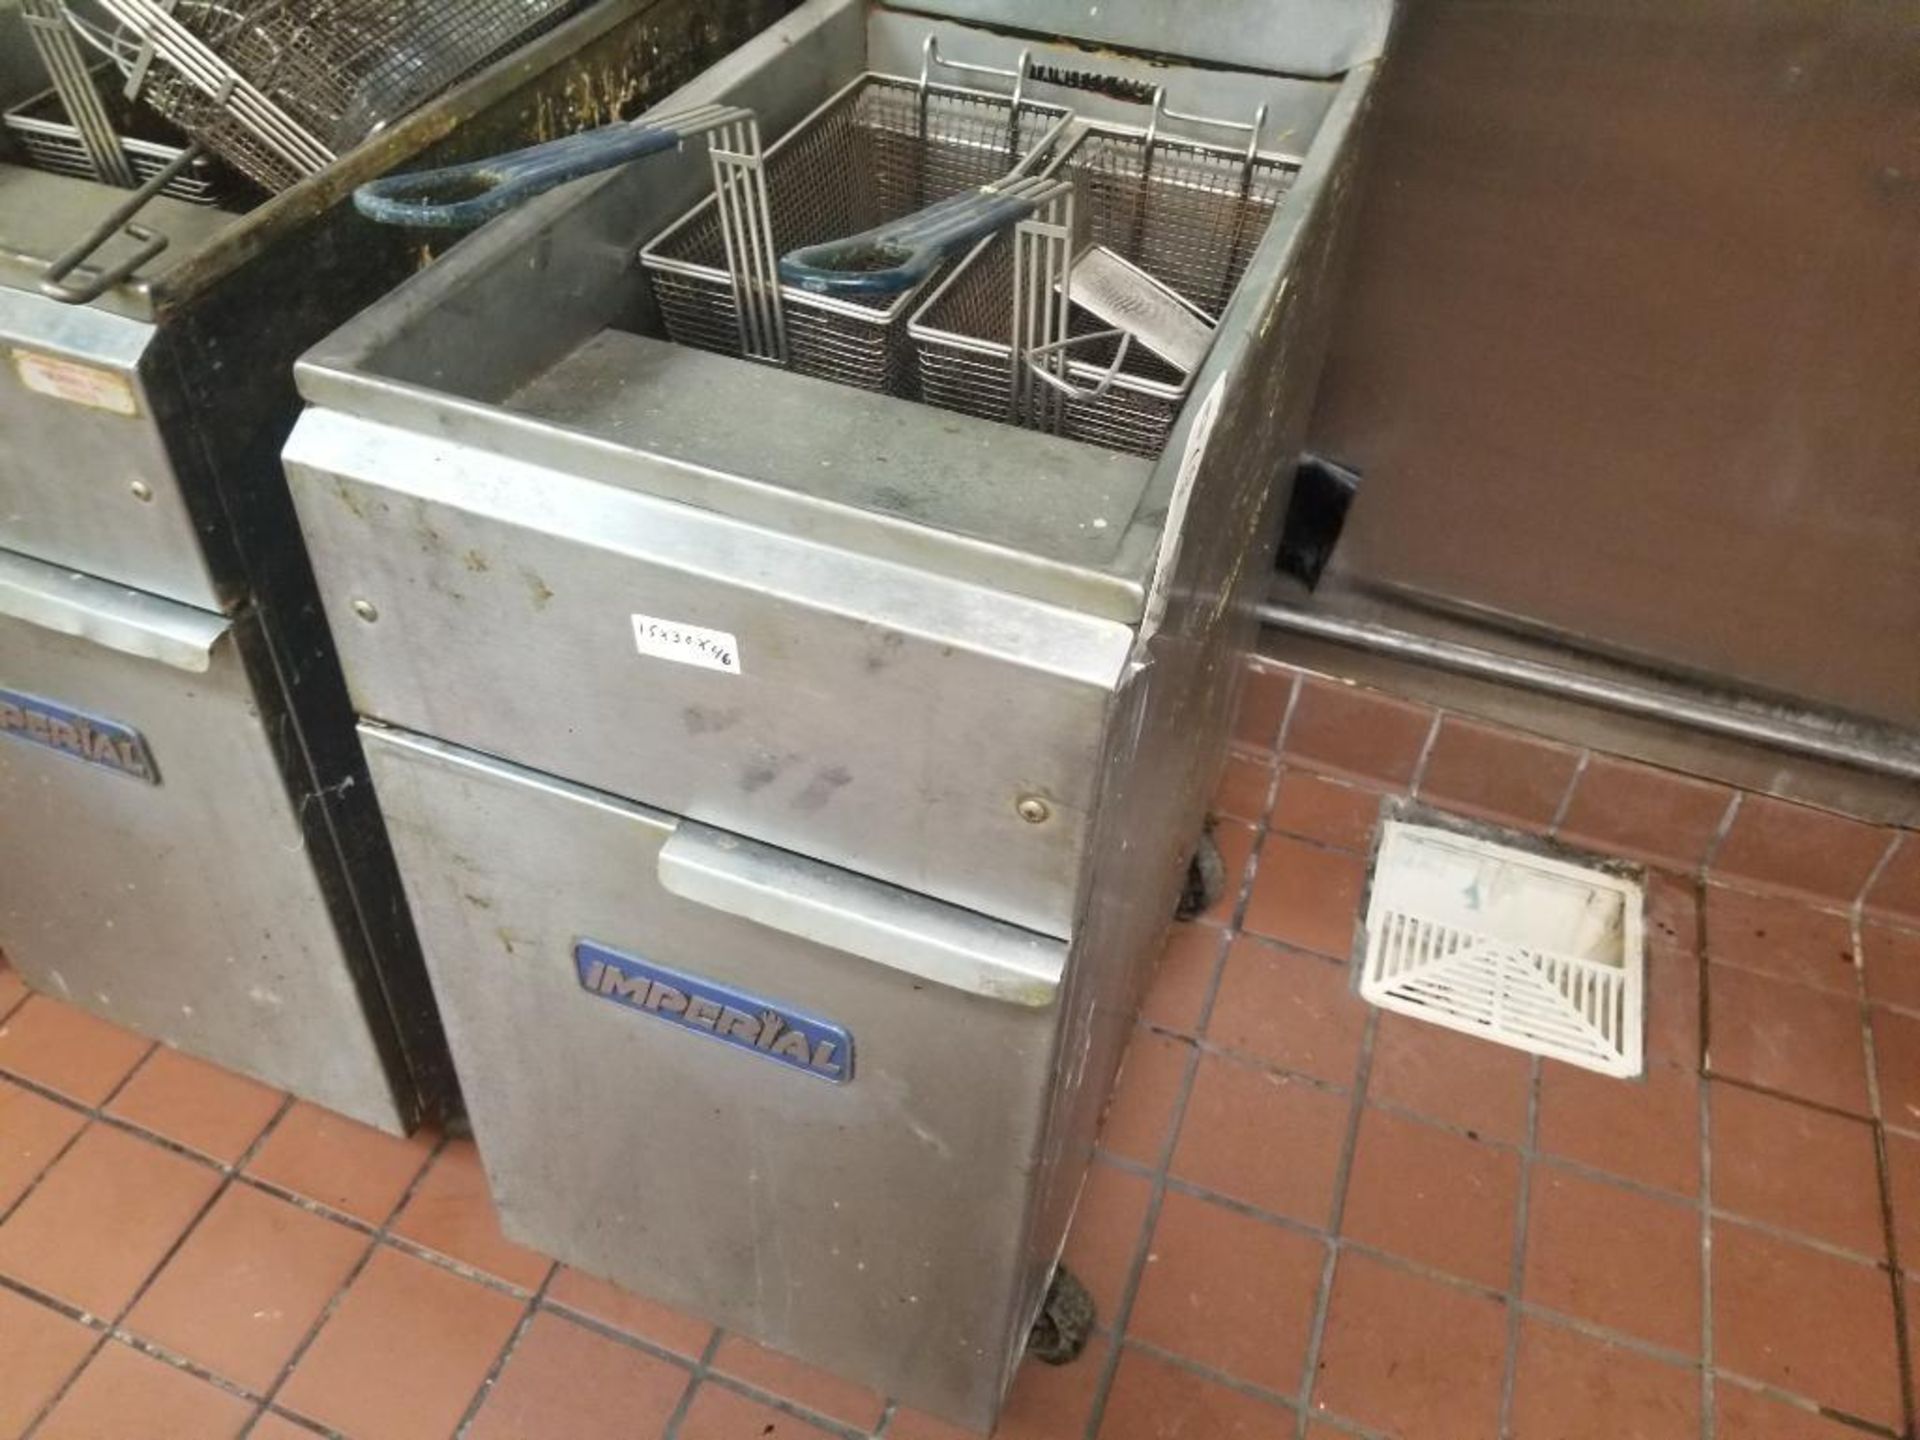 Imperial natural gas double basket deep fryer. Model IFS-40.